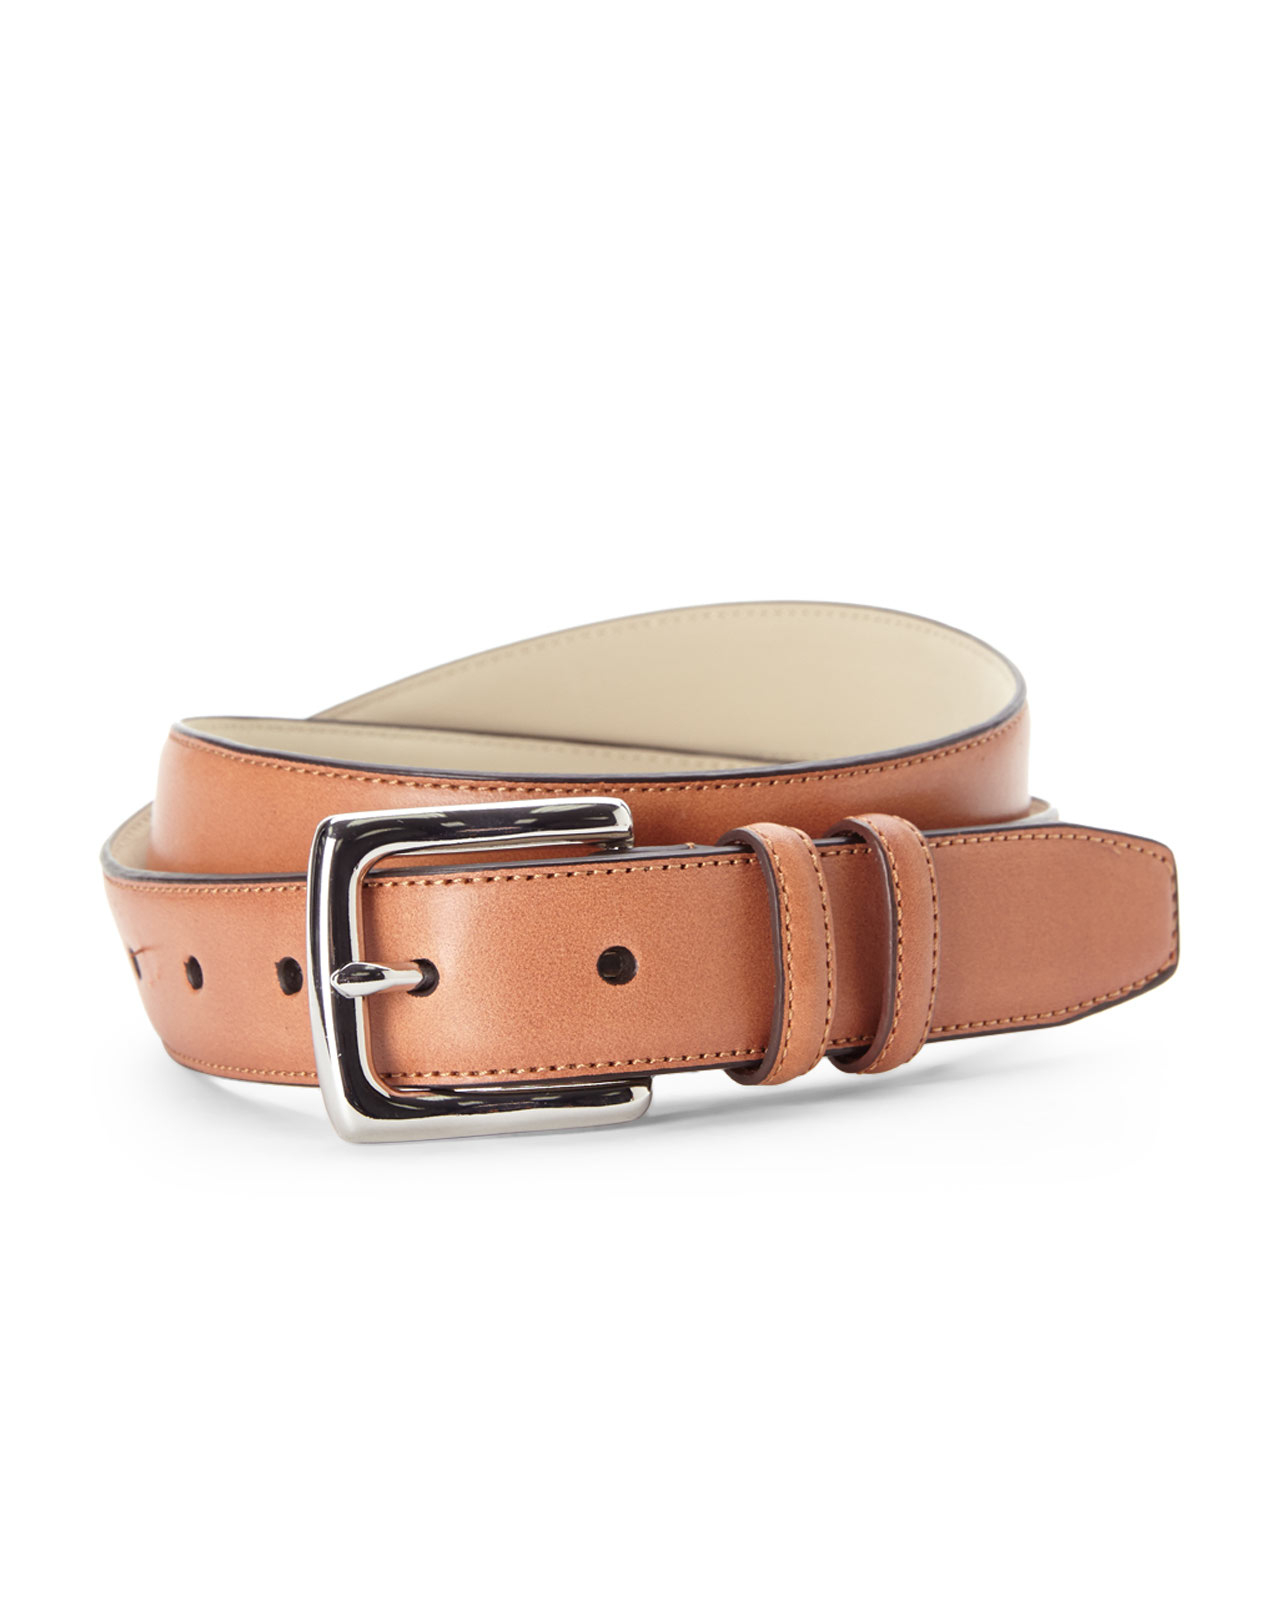 Cole Haan Stitched Edge Leather Belt in Cognac (Brown) for Men - Lyst